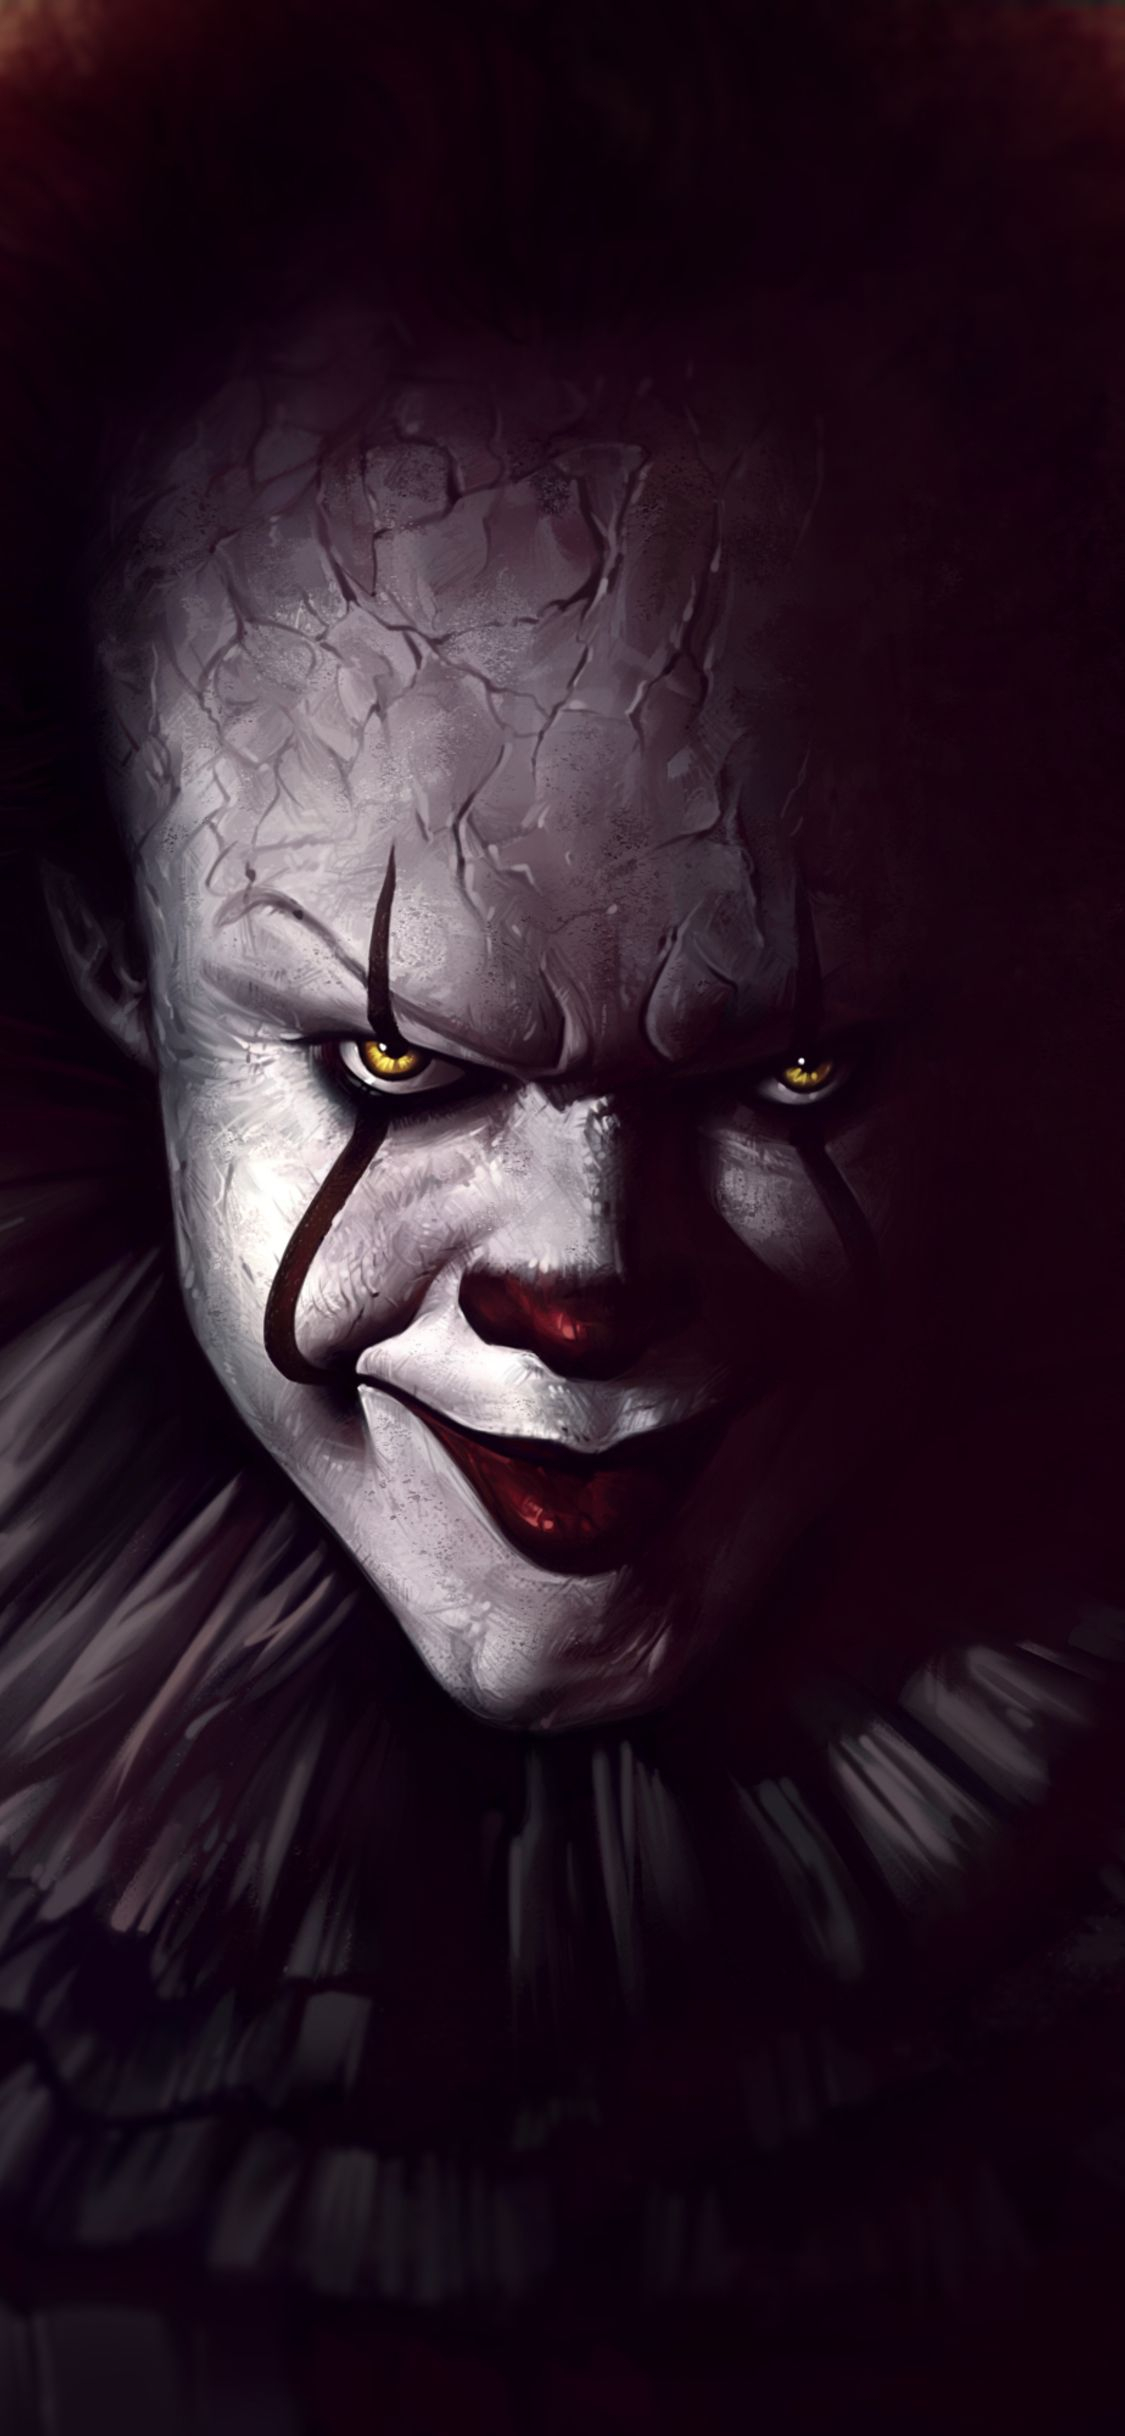 1125x2436 Scary Clown Phone Wallpapers